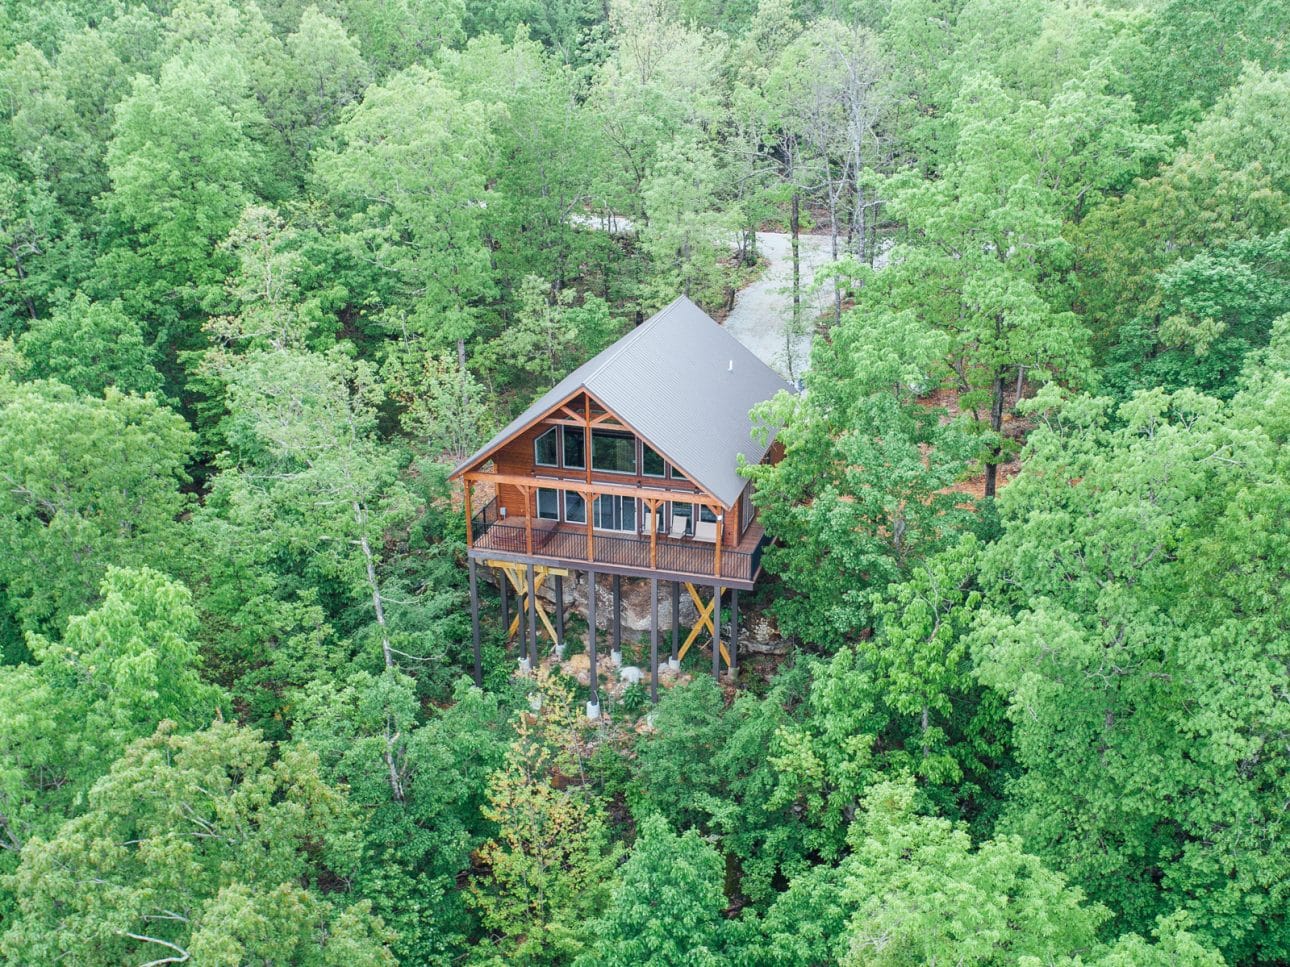 The Wanderlust Cabin in its secluded treetop setting.